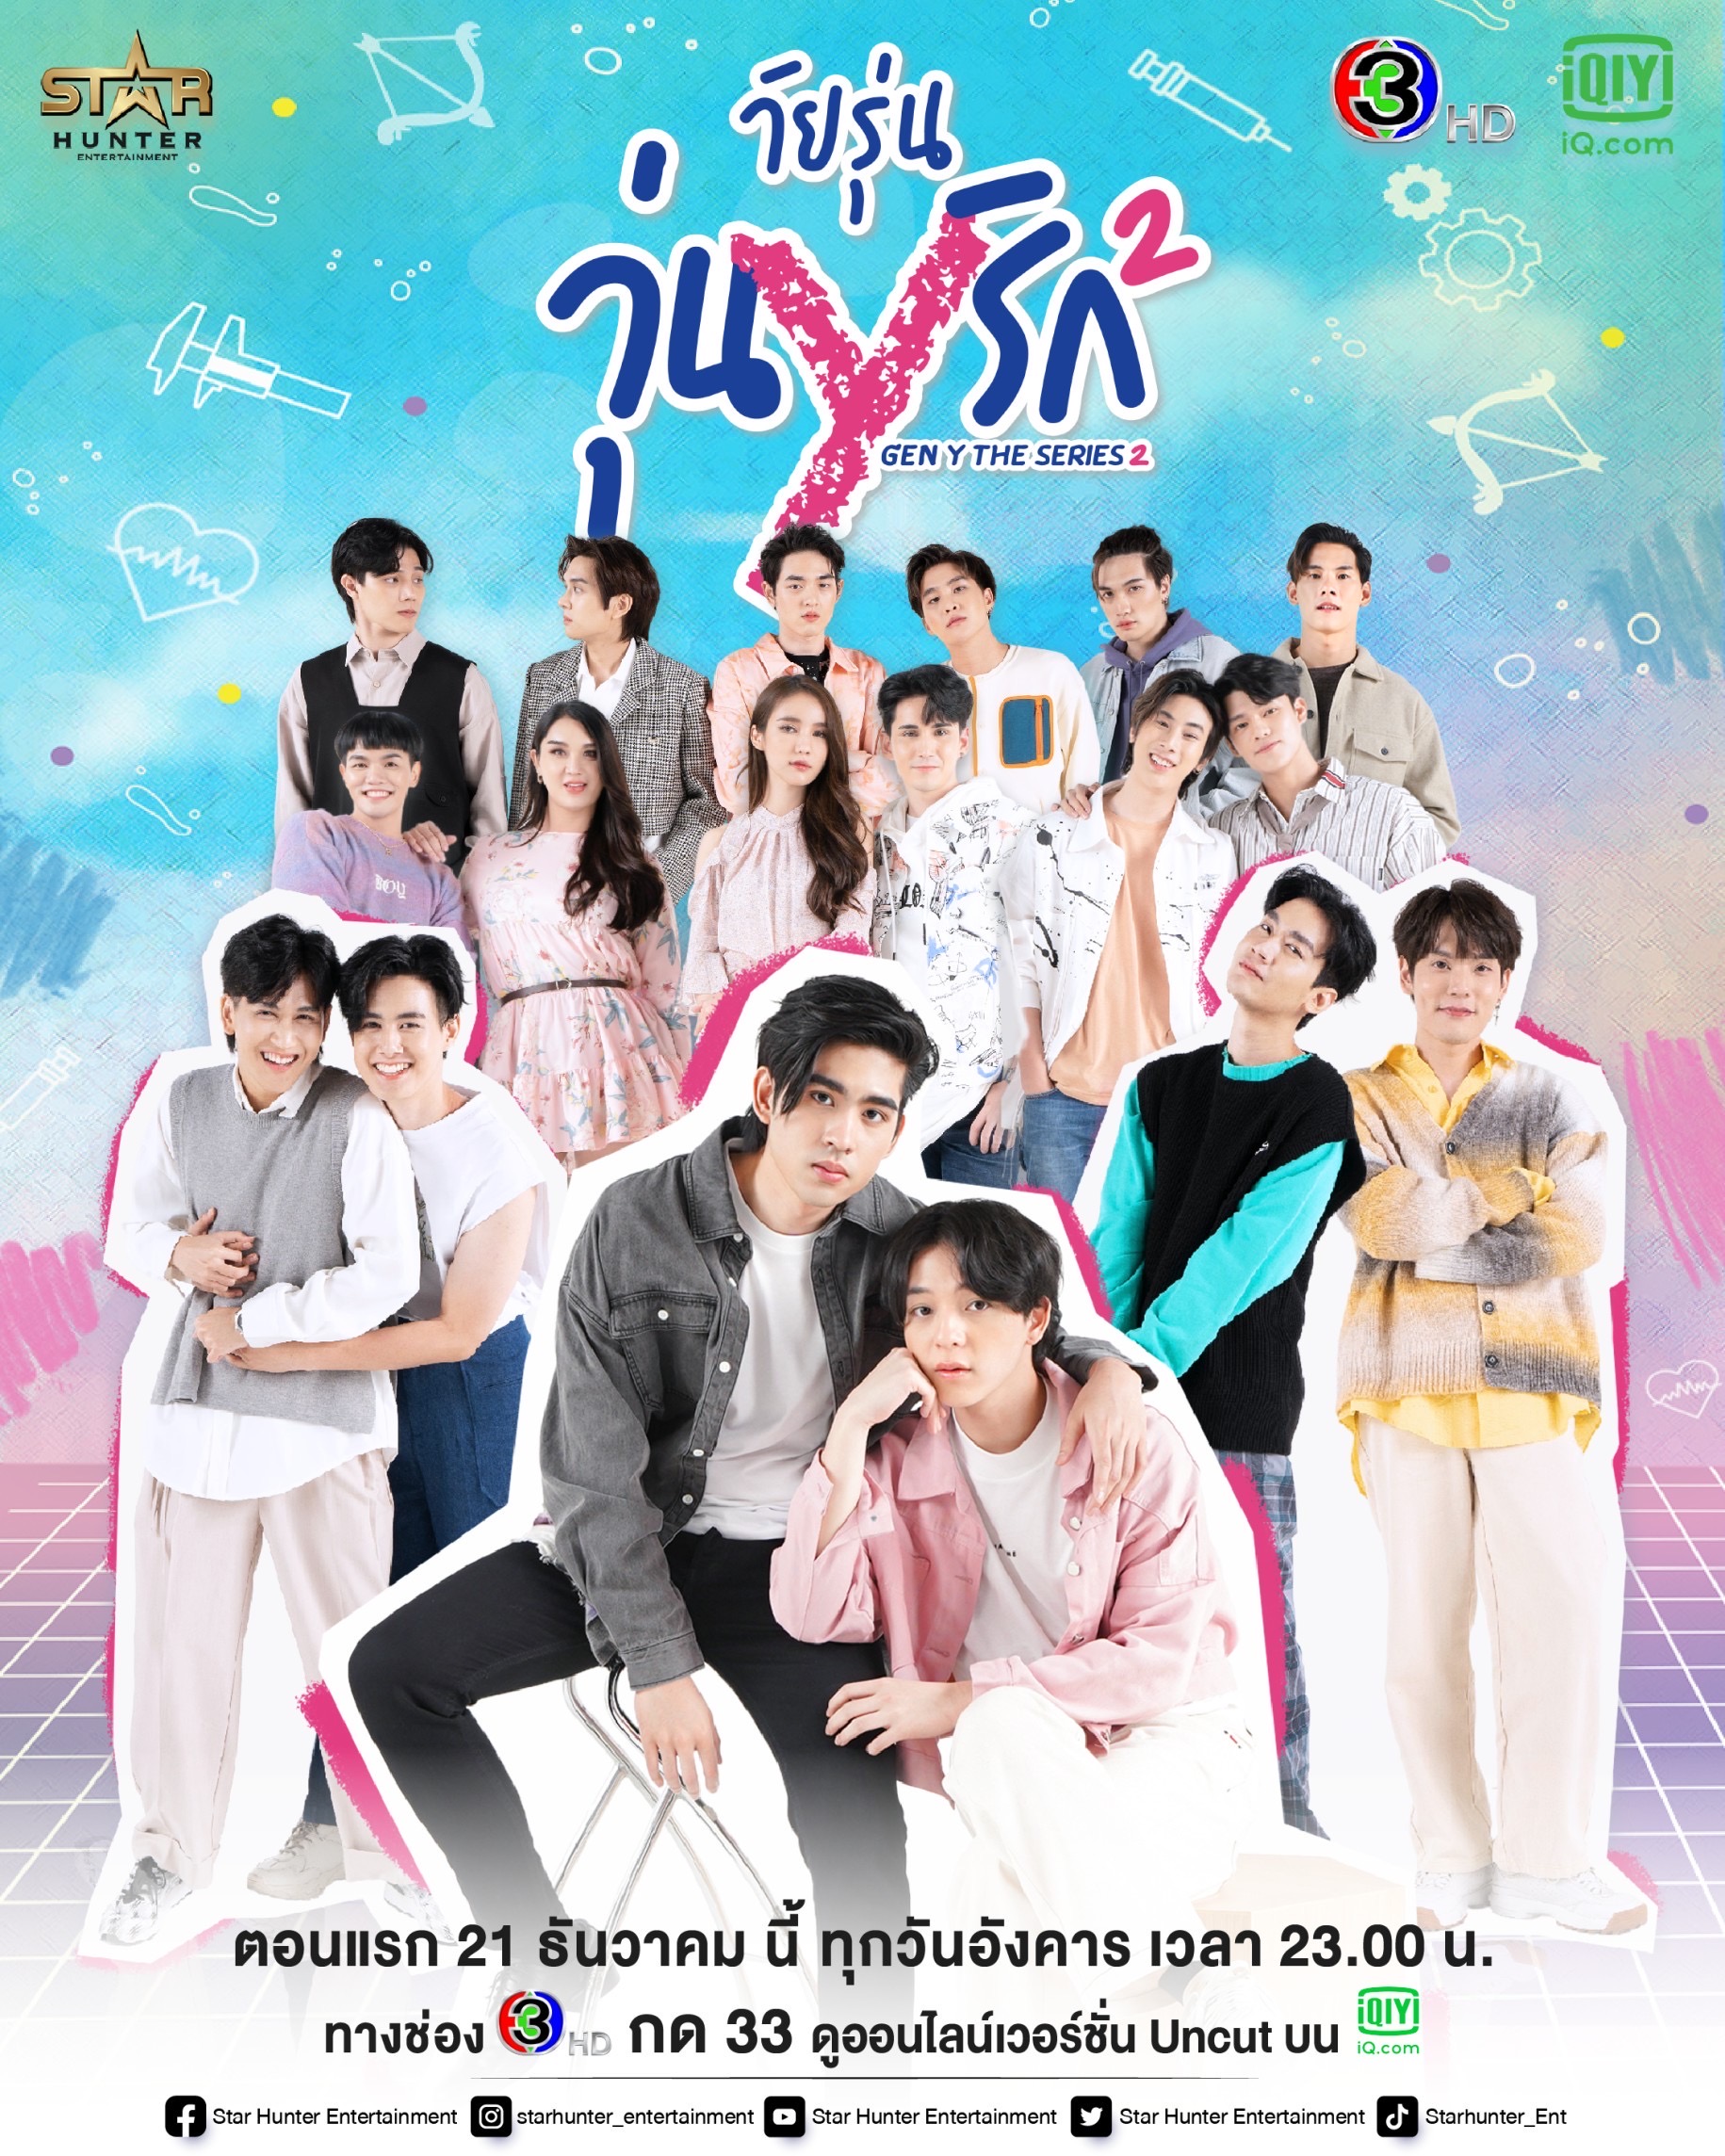 GenY The Series SS 2